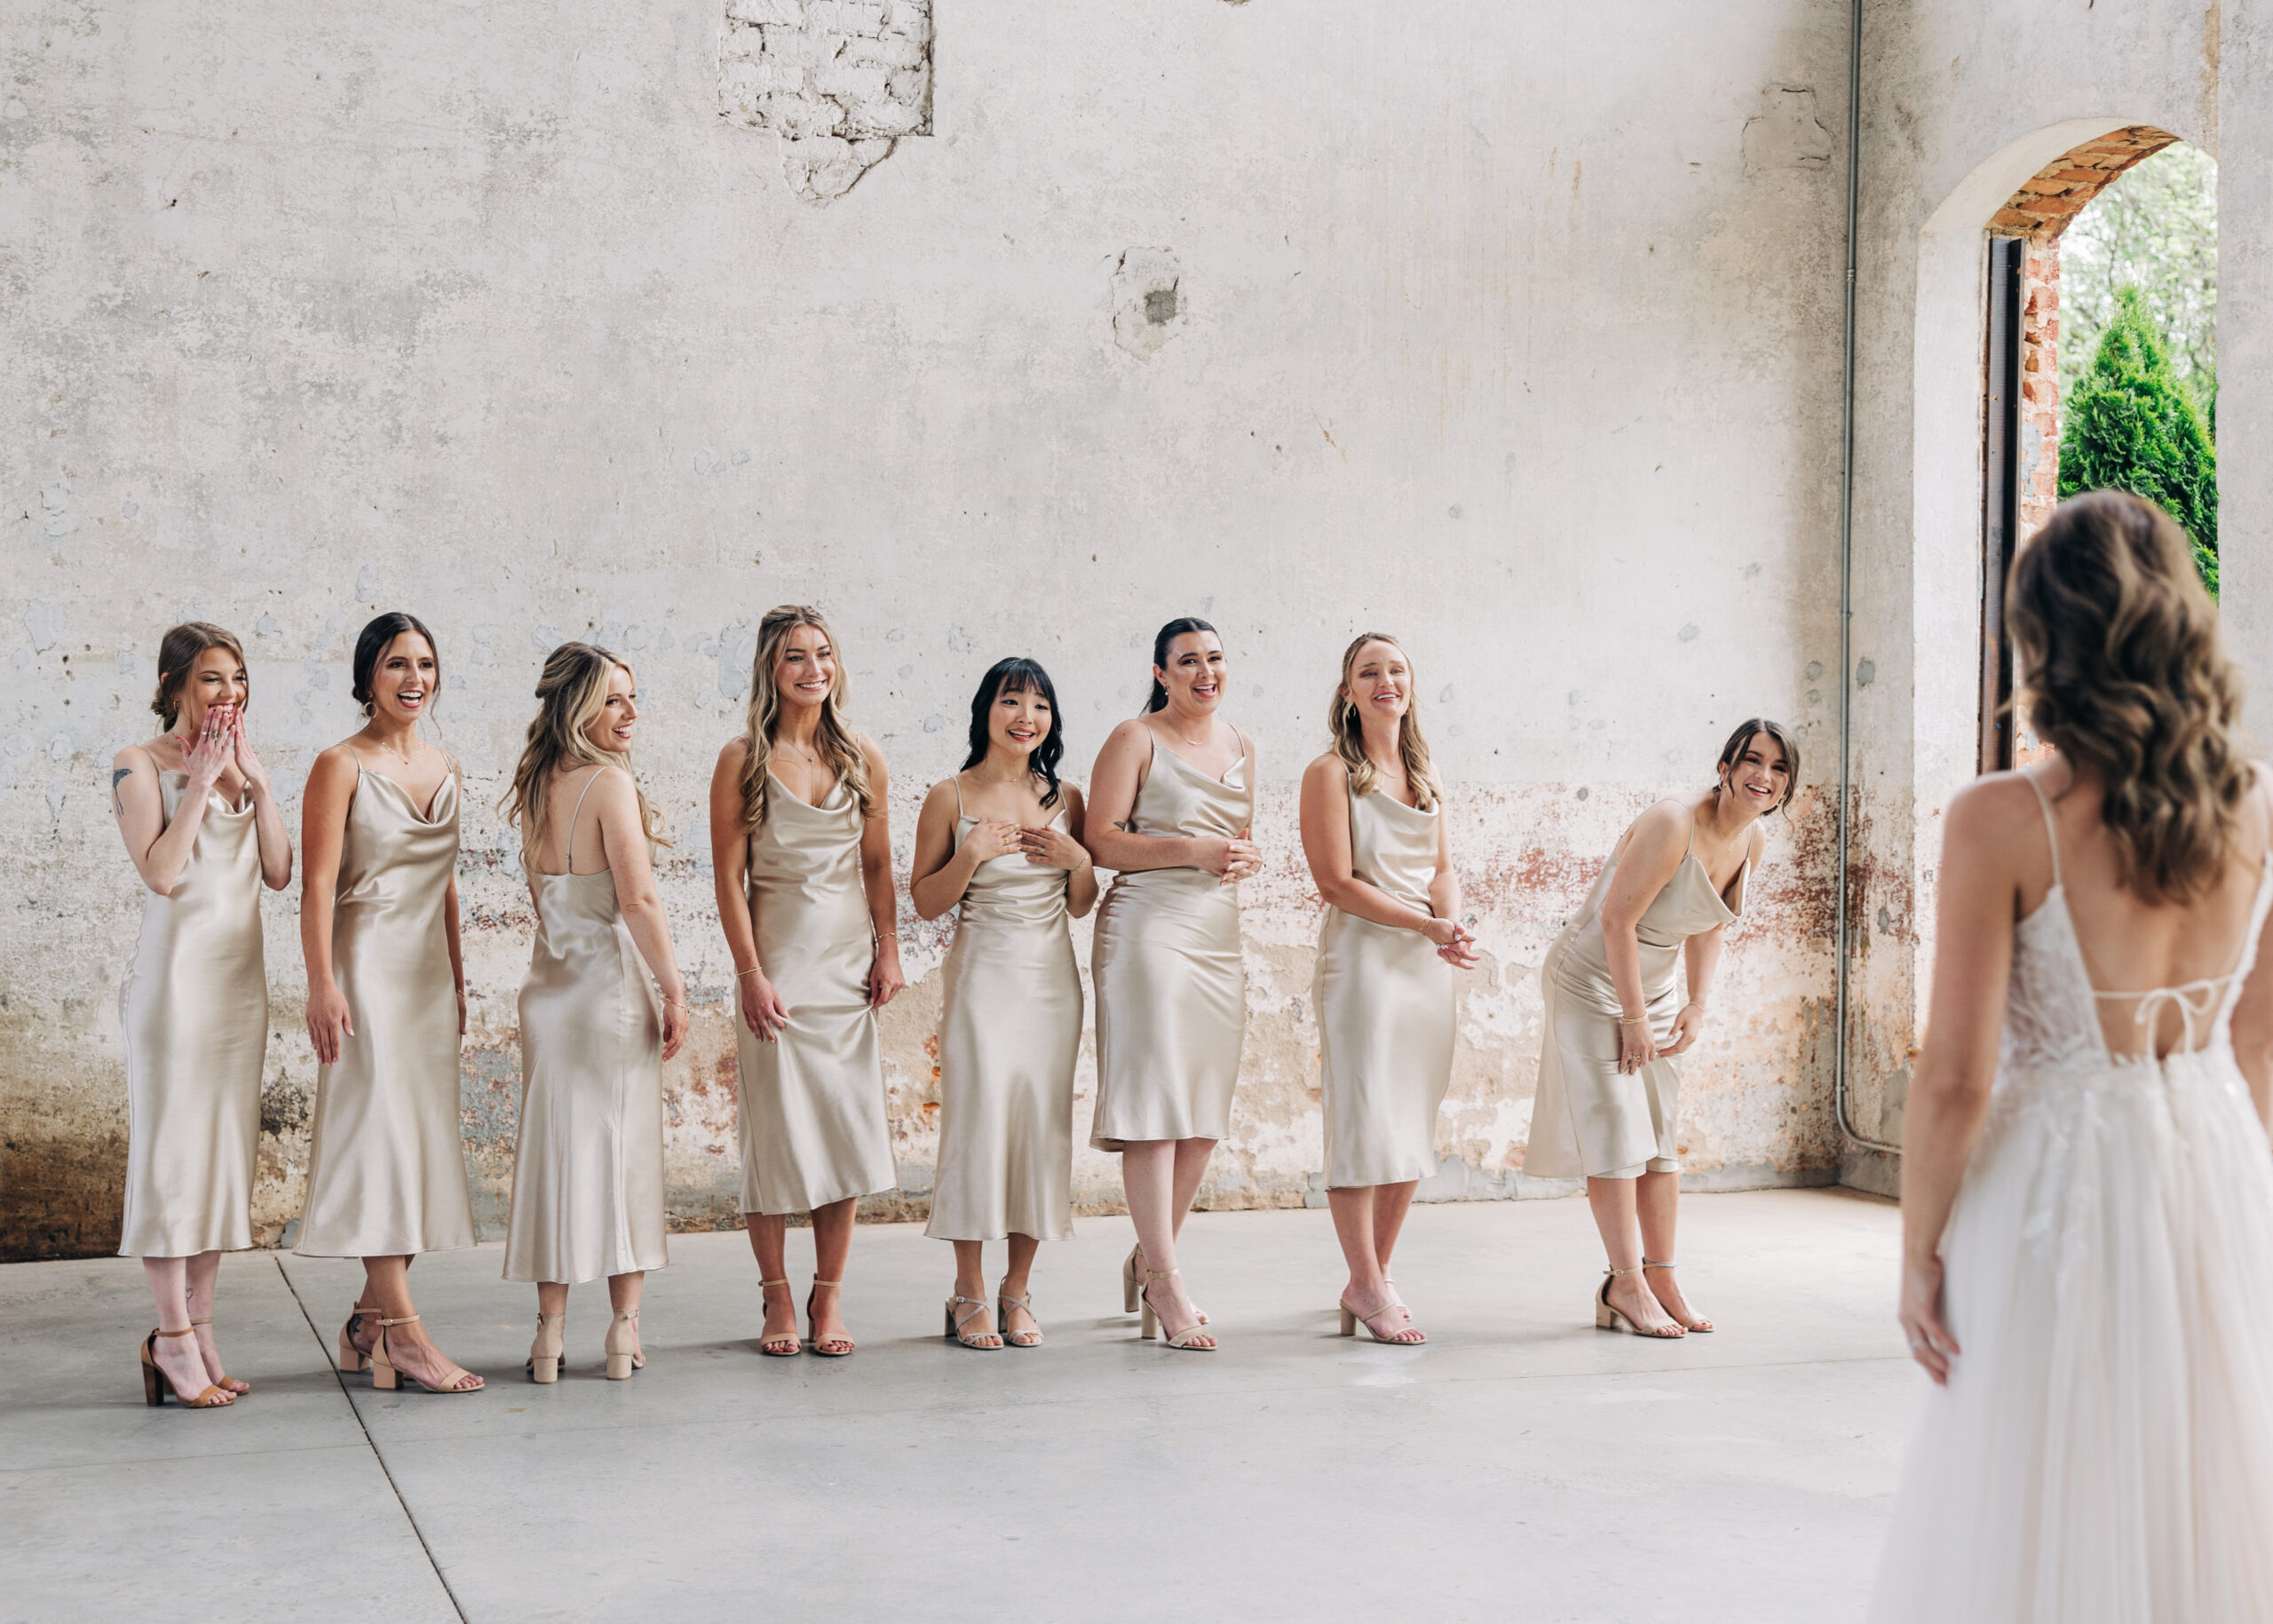 A bride shows off her dress and look to her bridesmaids in a rustic building